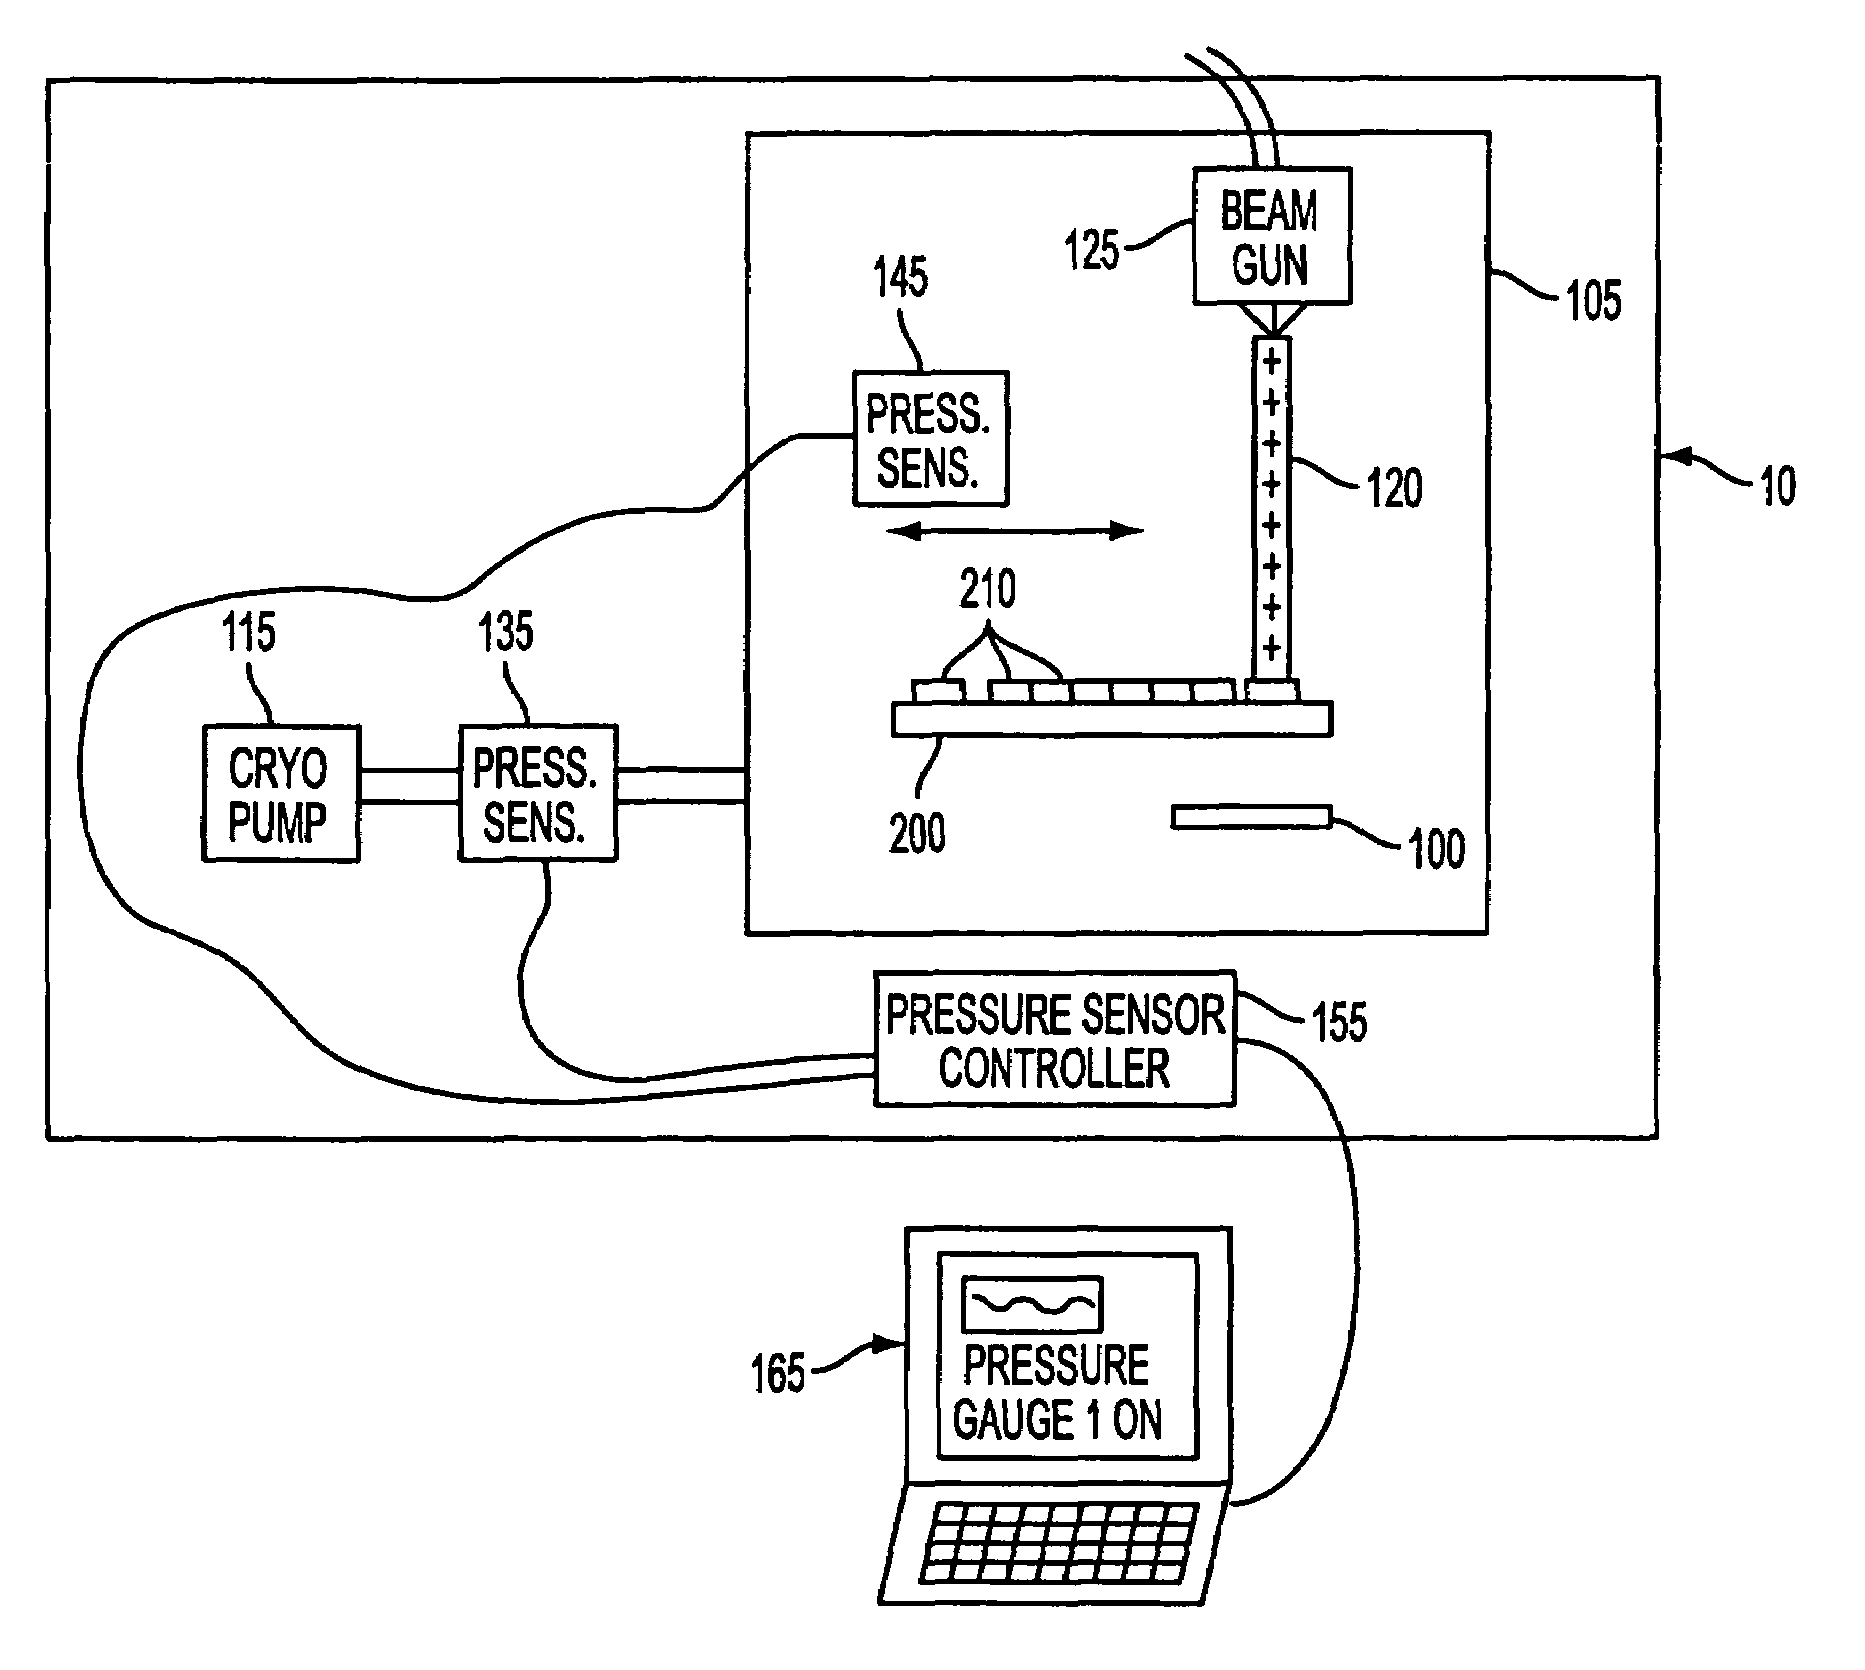 Utilization of an ion gauge in the process chamber of a semiconductor ion implanter